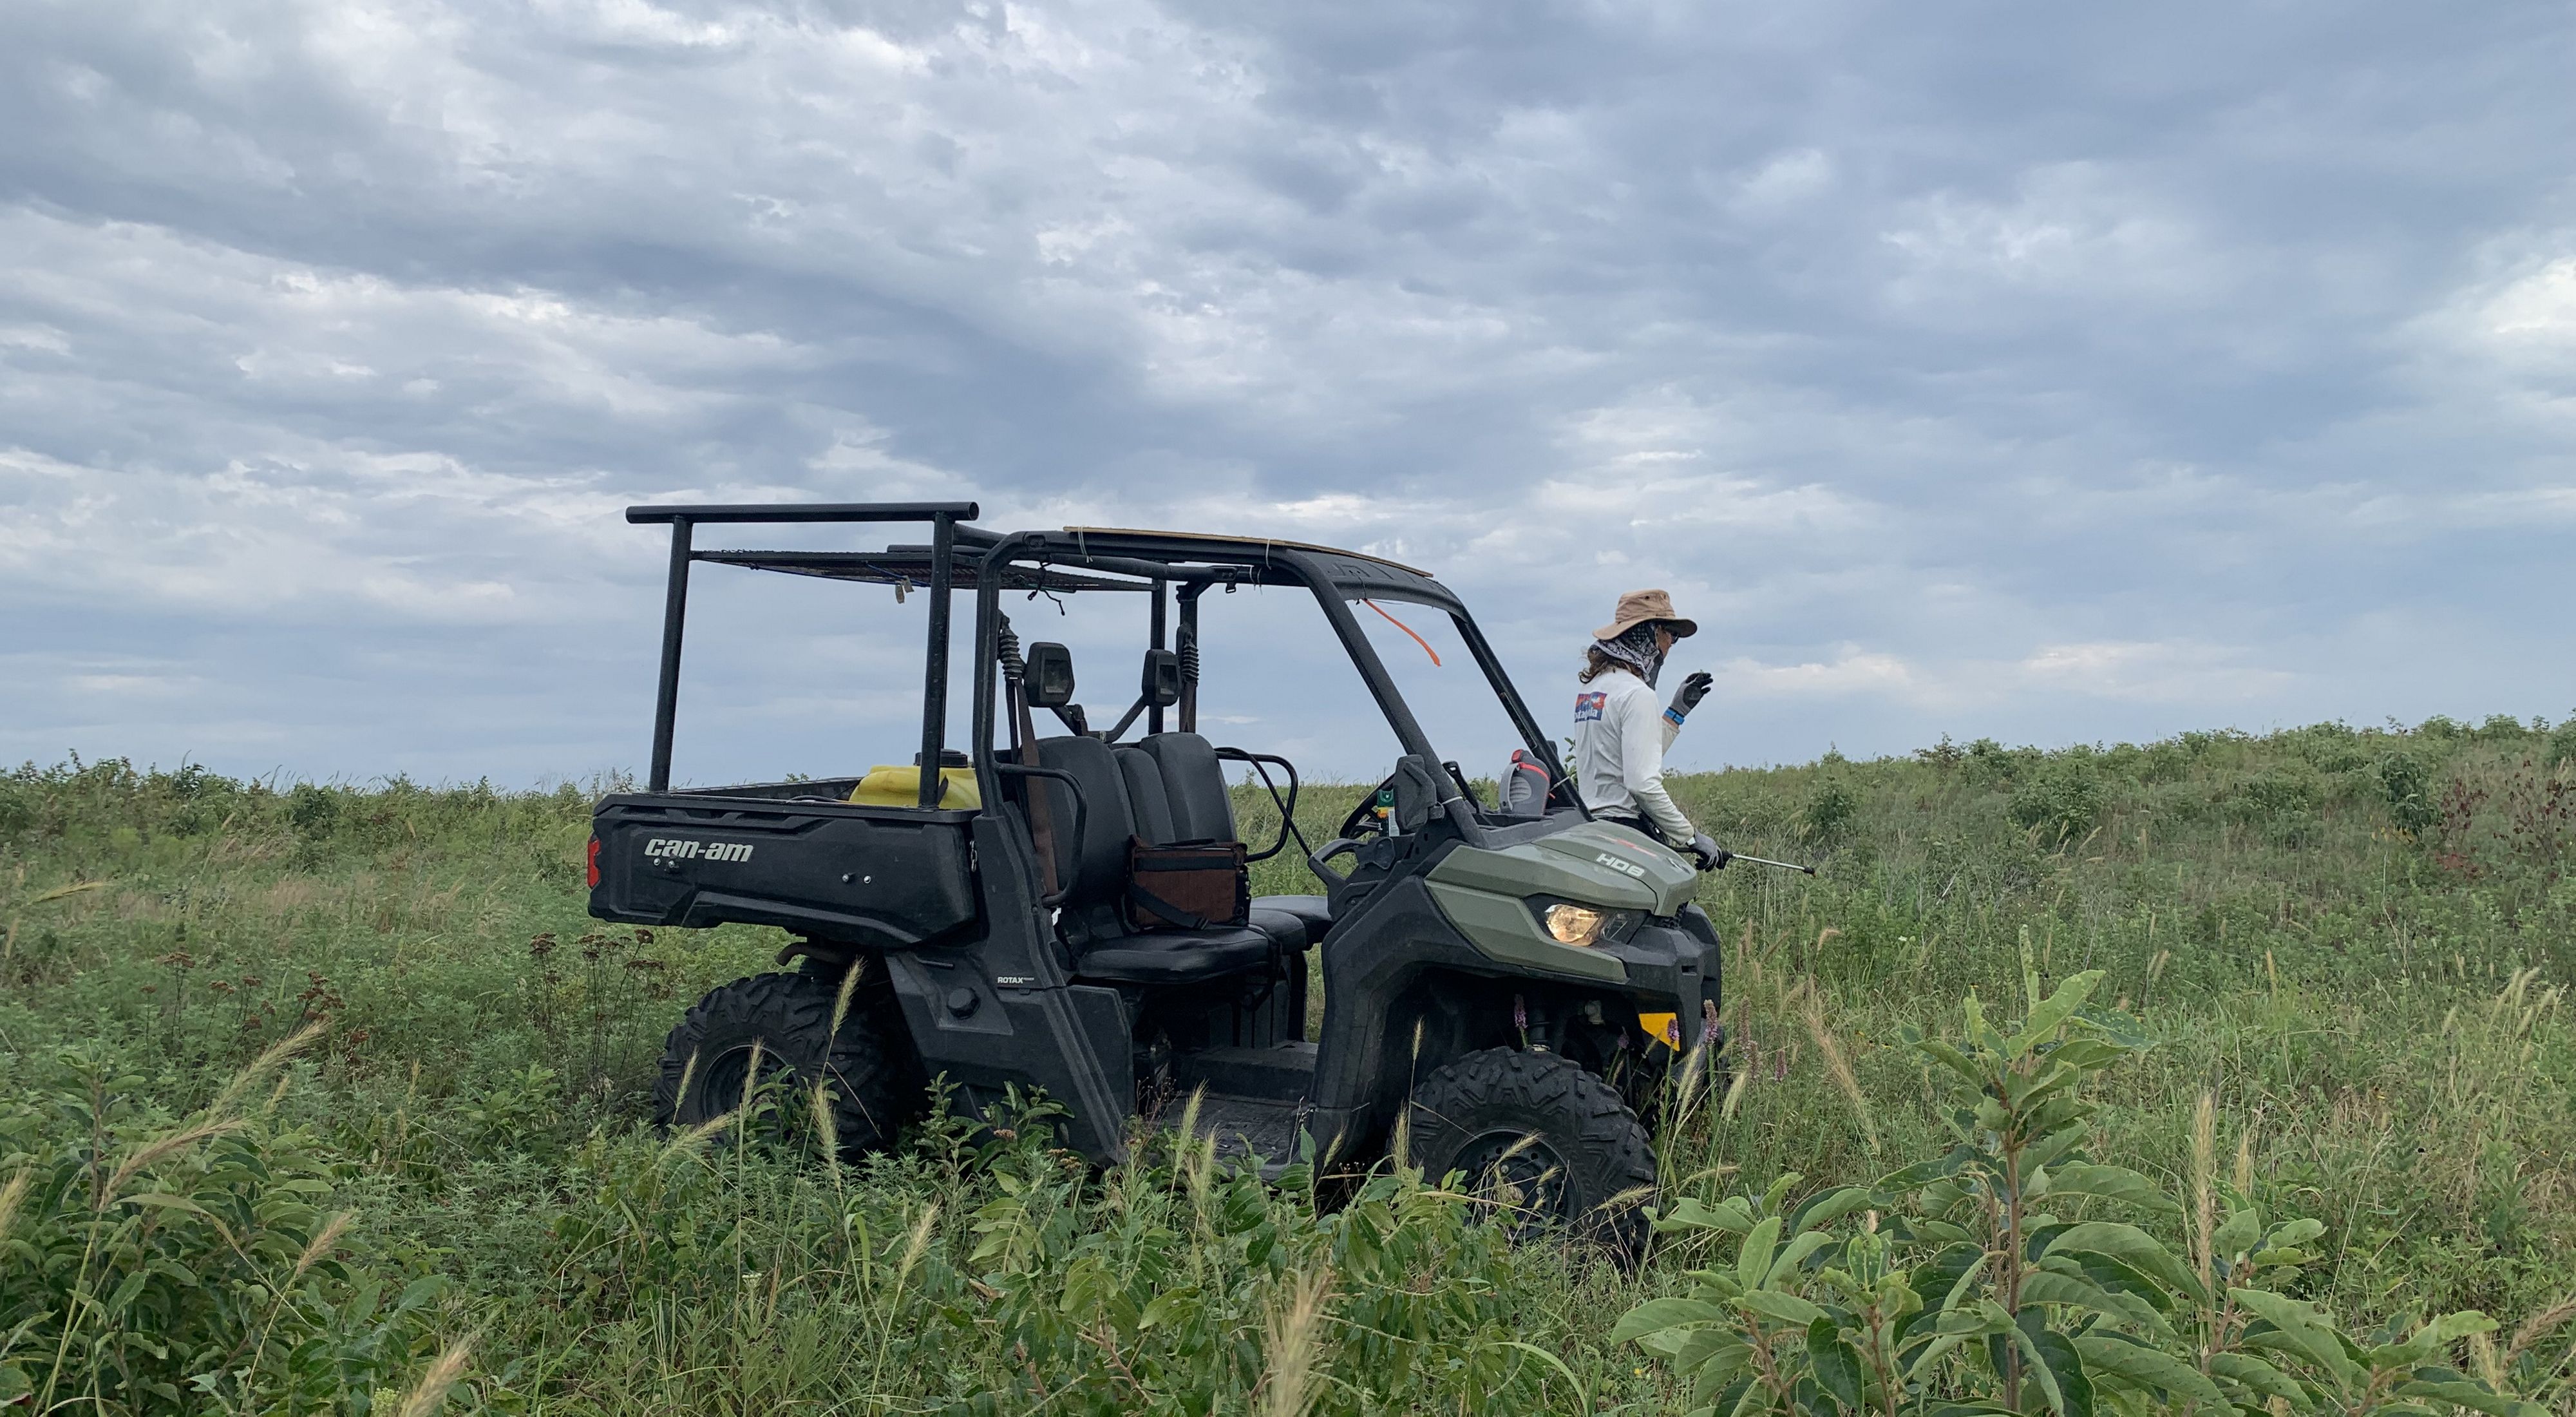 A man stands next to a UTV and sprays invasive plants in a wide field.